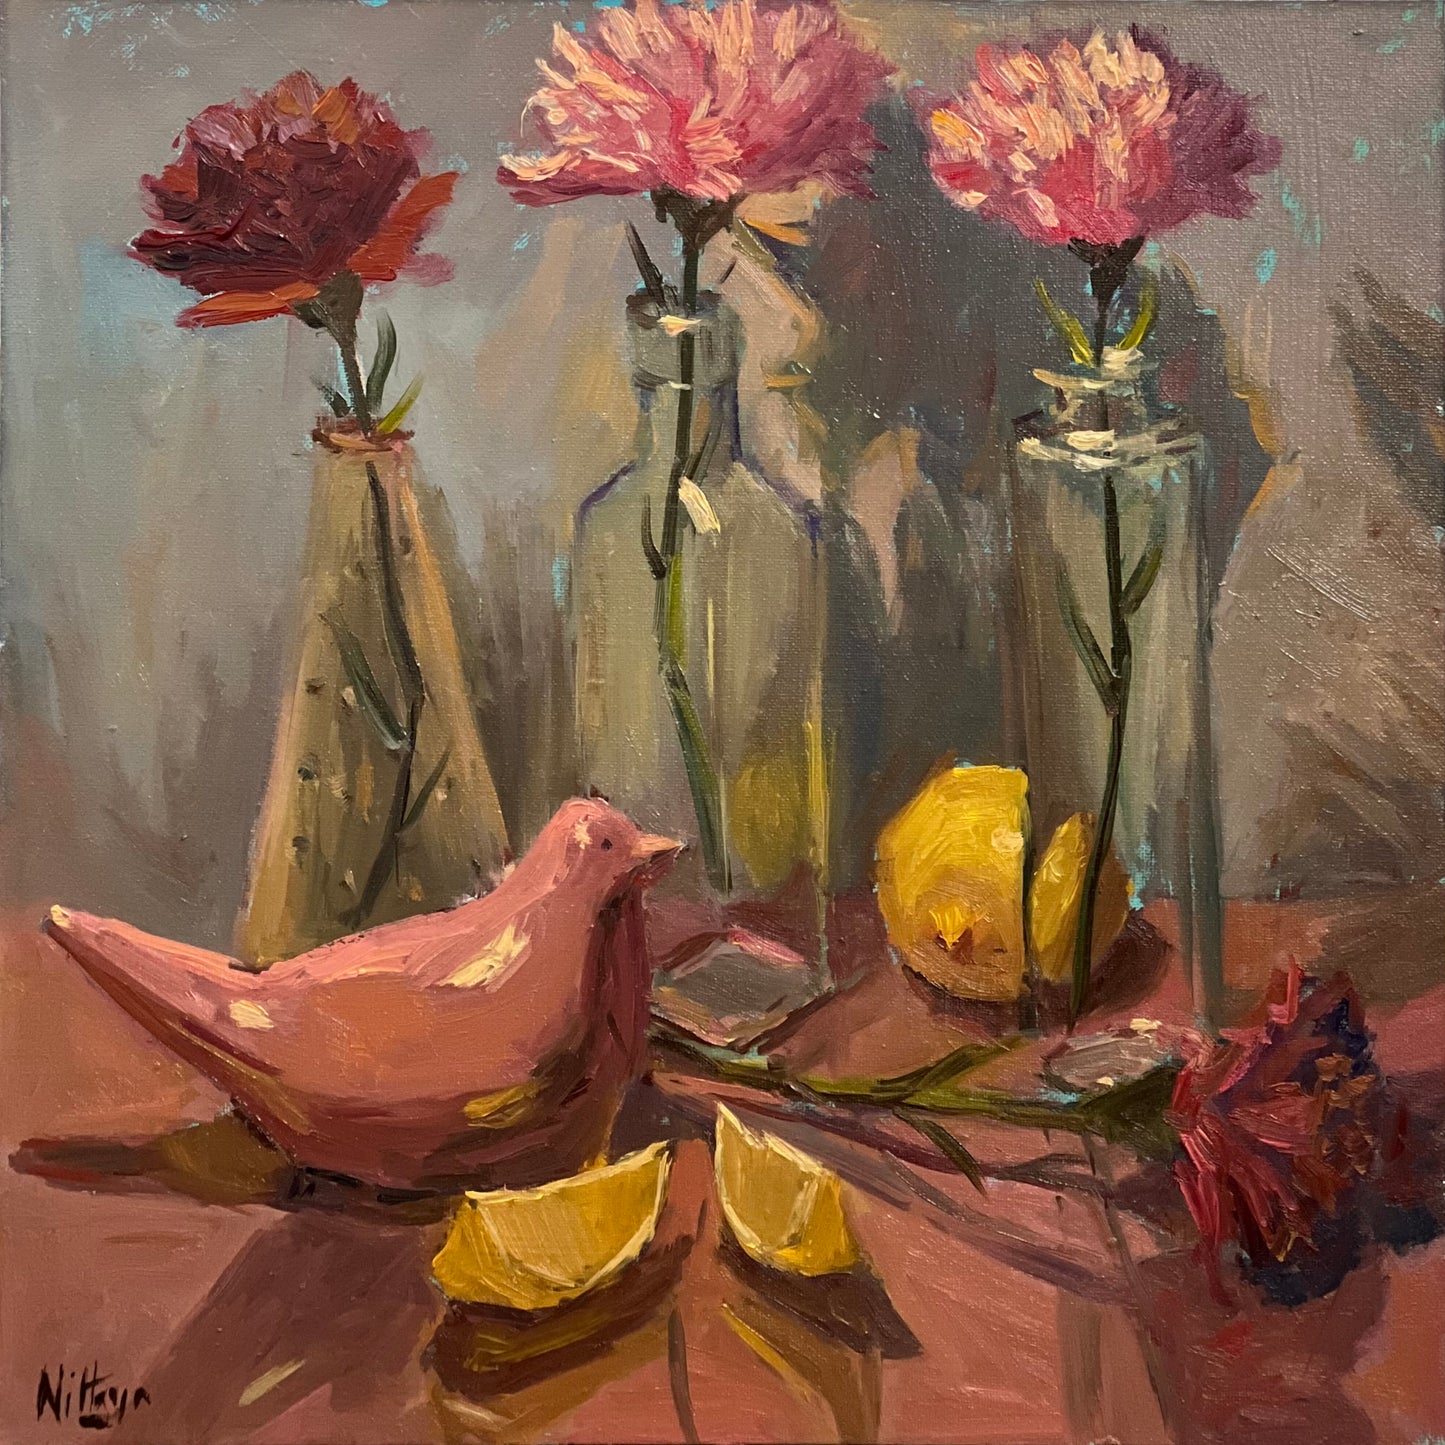 An ode to pink in the studio - still life oil painting